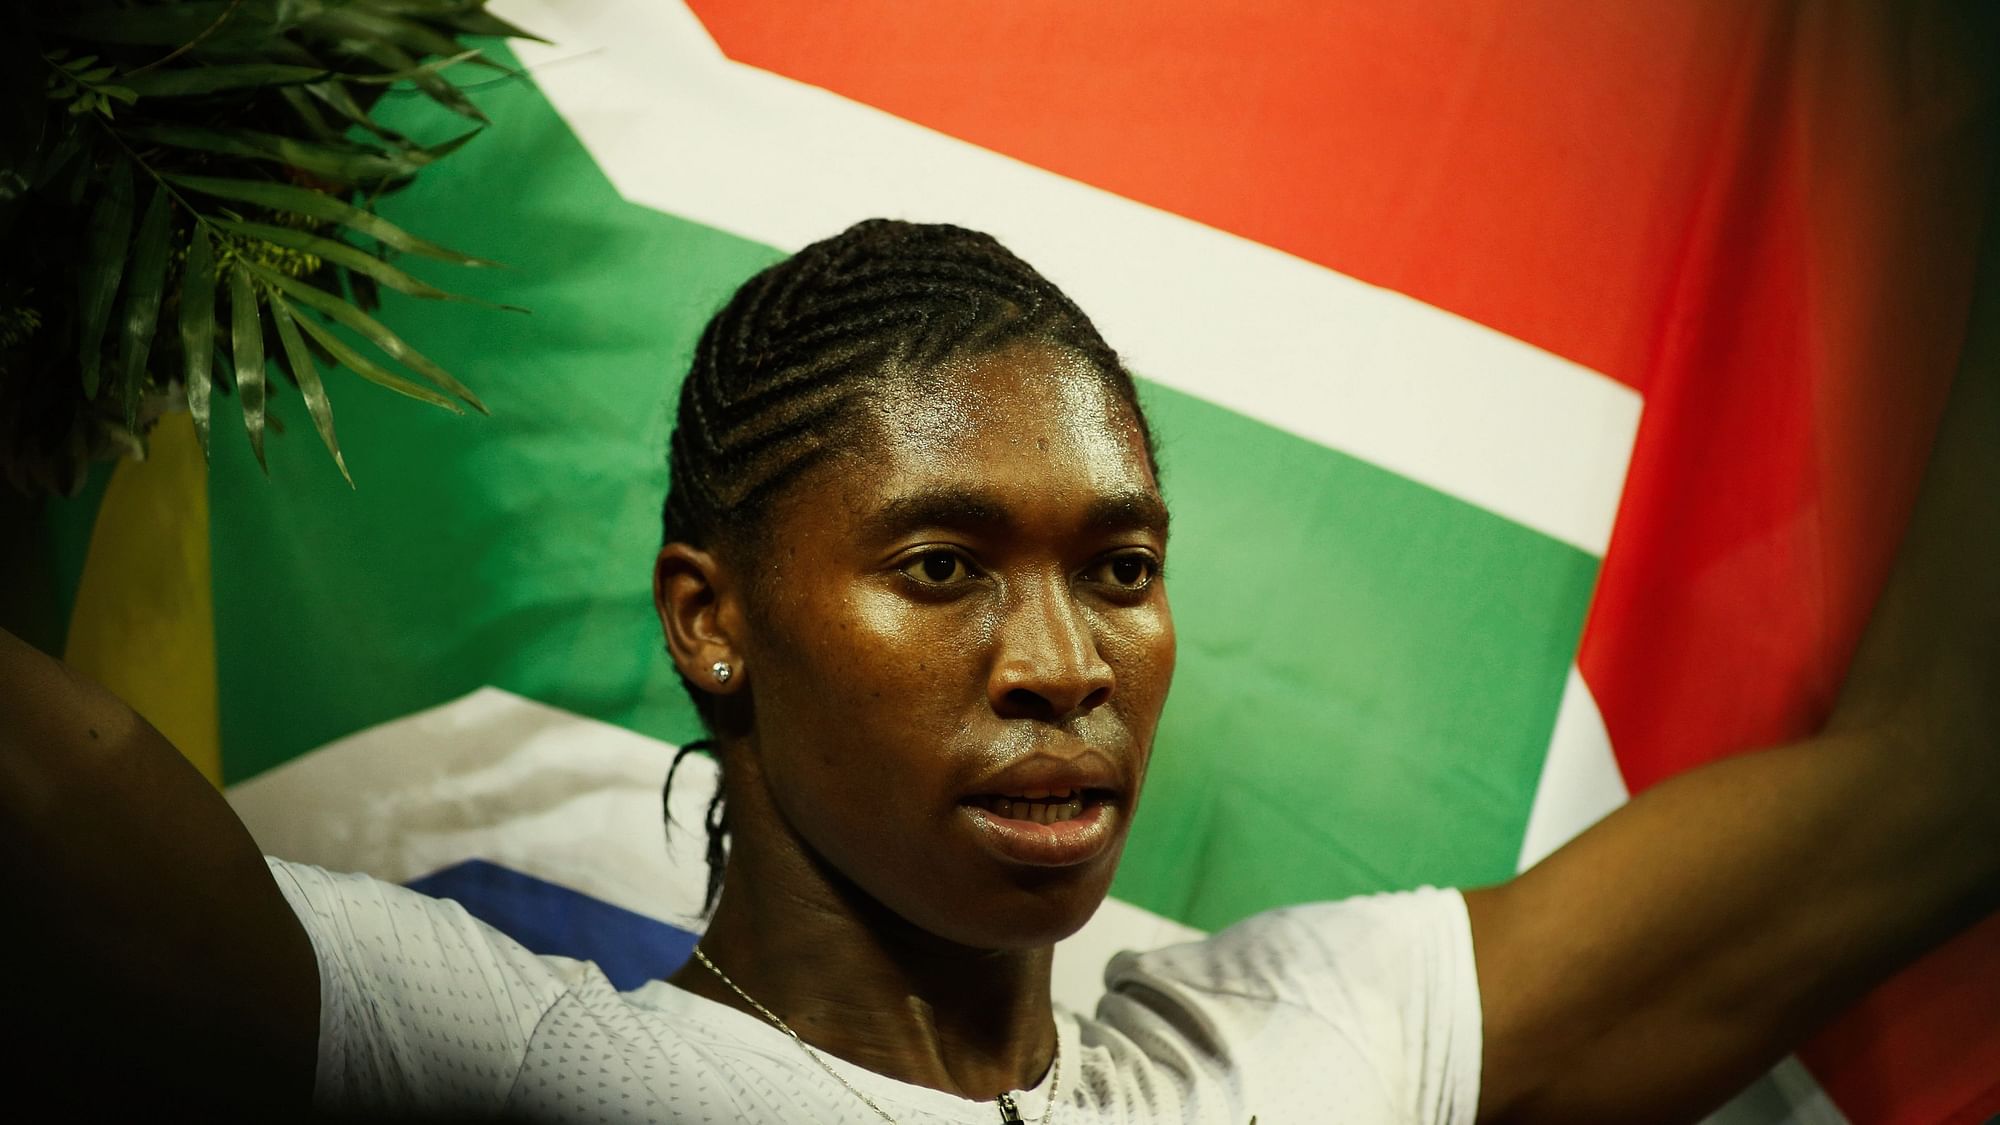 Caster Semenya needs to medically reduce the levels of testosterone in her body in order to compete.